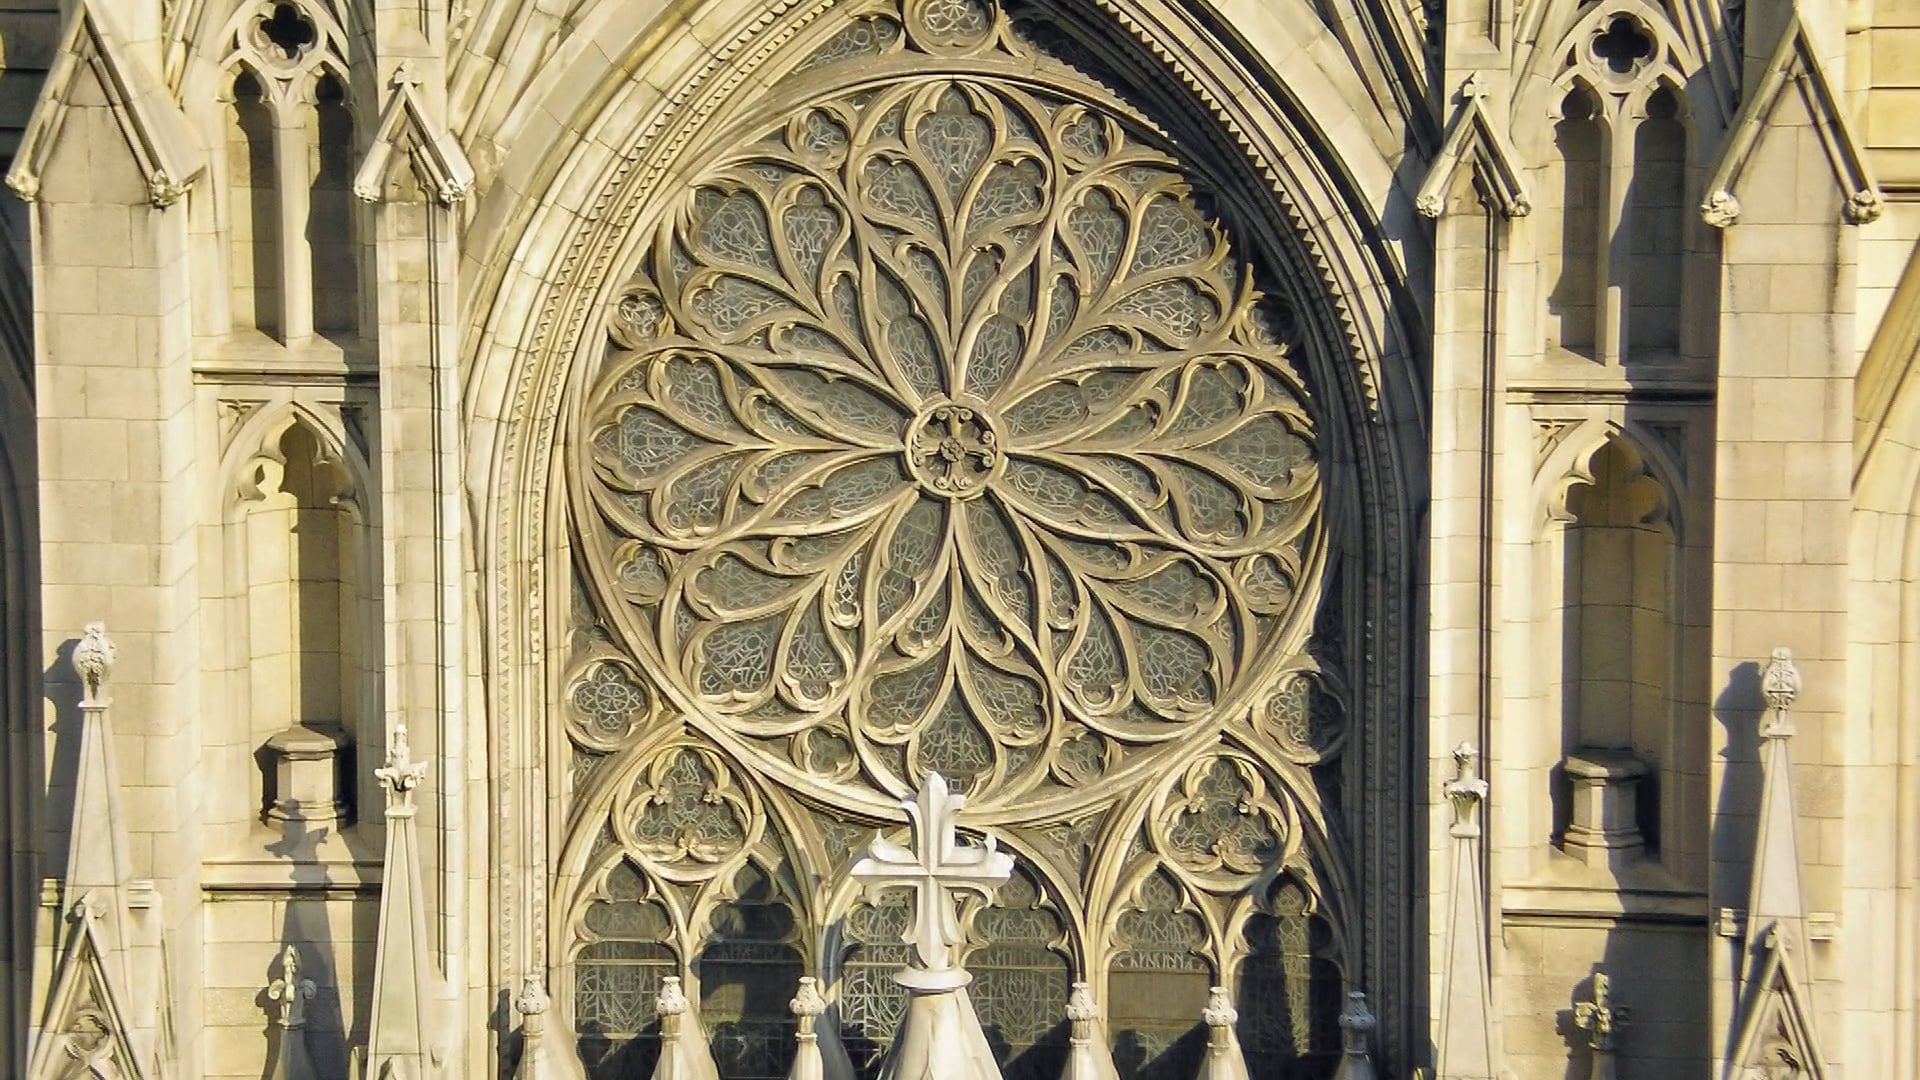 Mass from St. Patrick's Cathedral - January 18, 2022